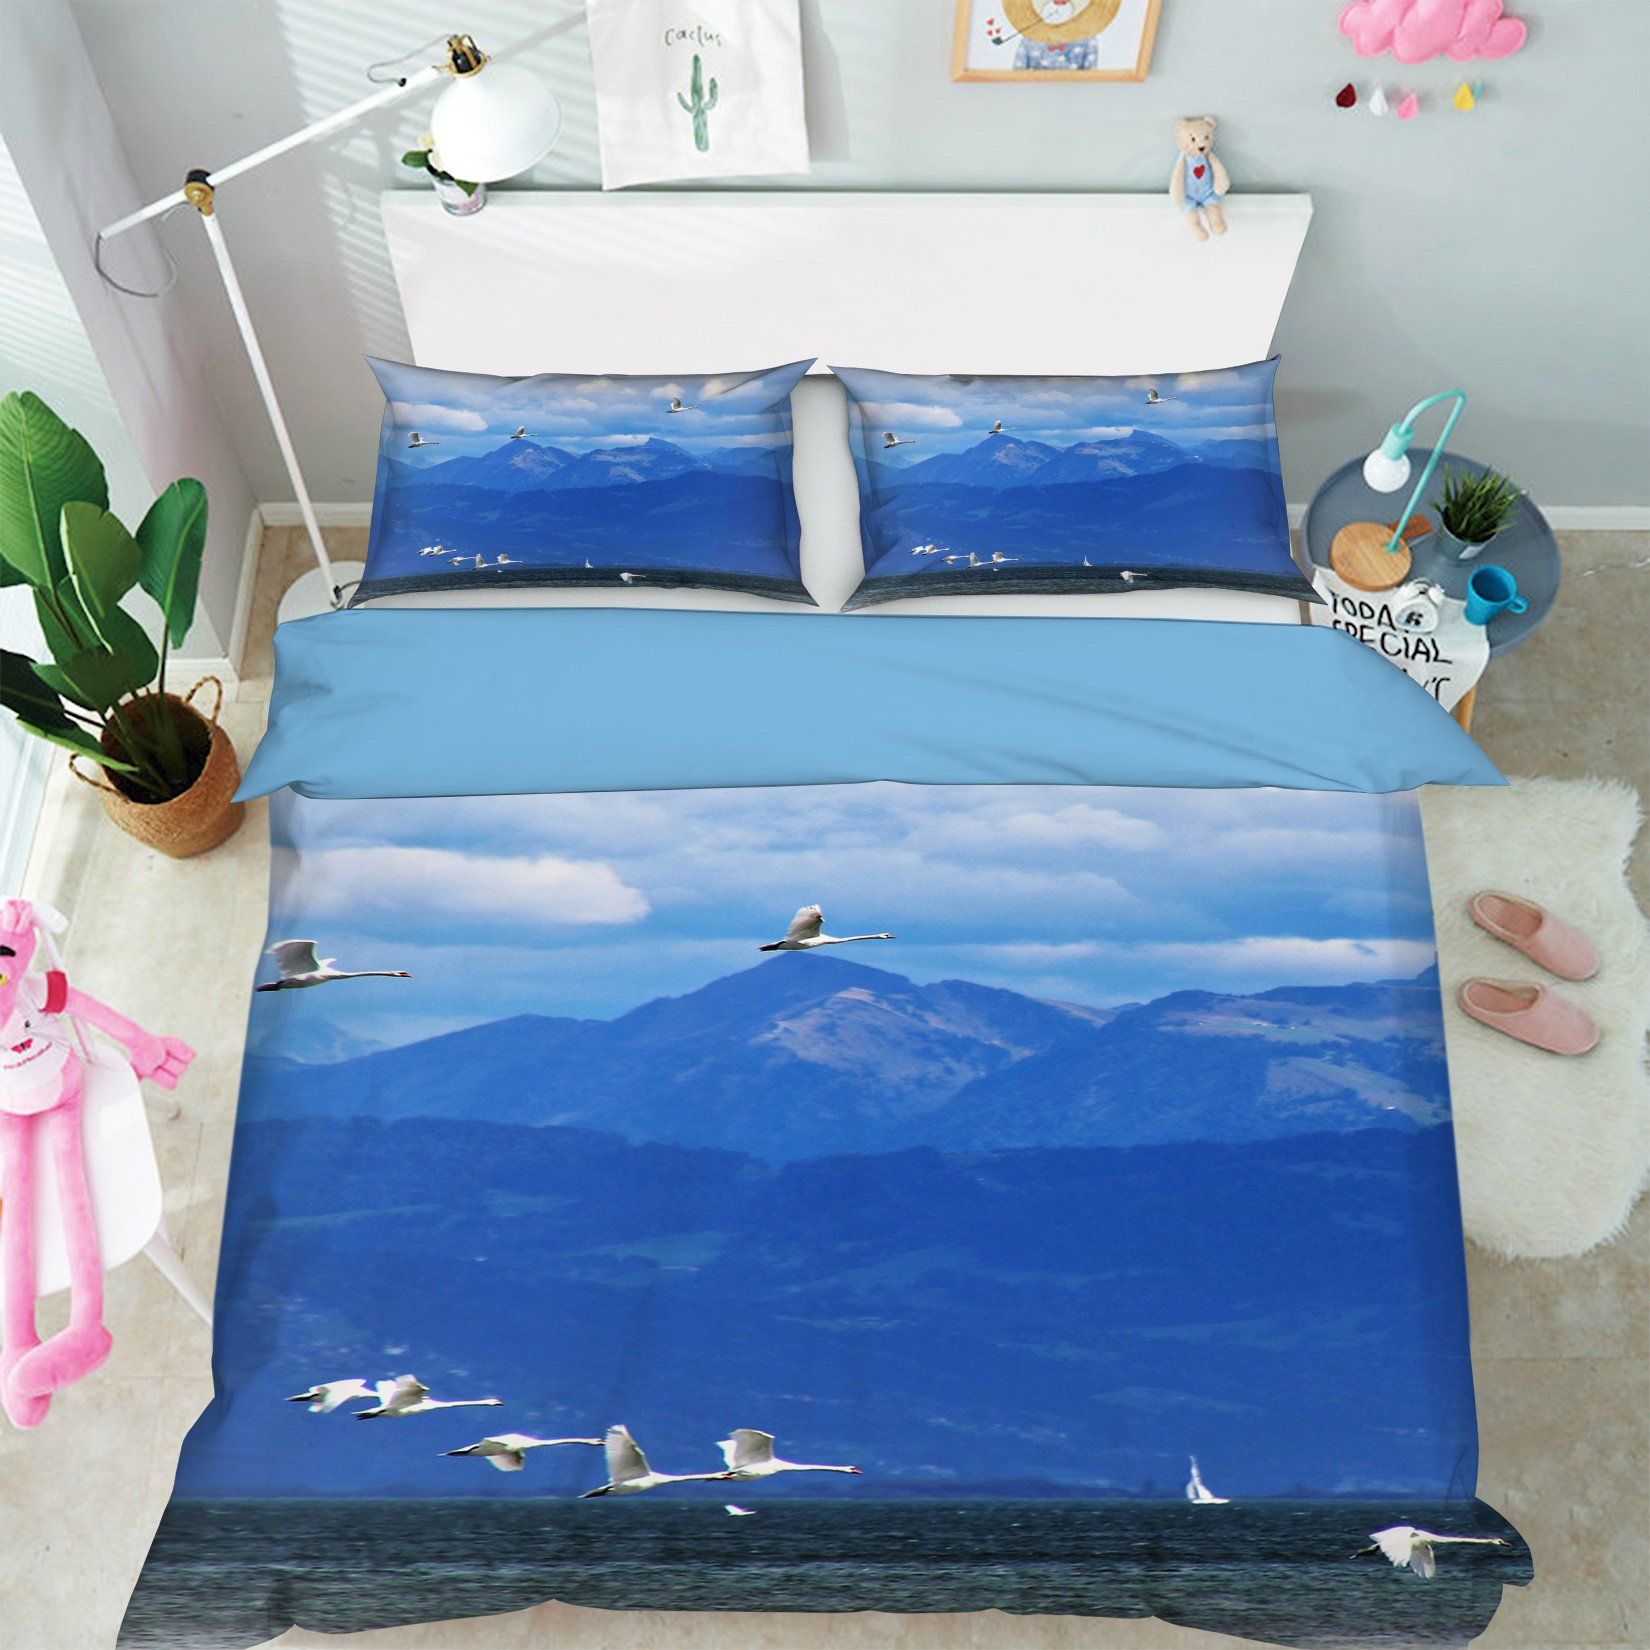 3D Mountains Flying White Crane 1939 Bed Pillowcases Quilt Quiet Covers AJ Creativity Home 